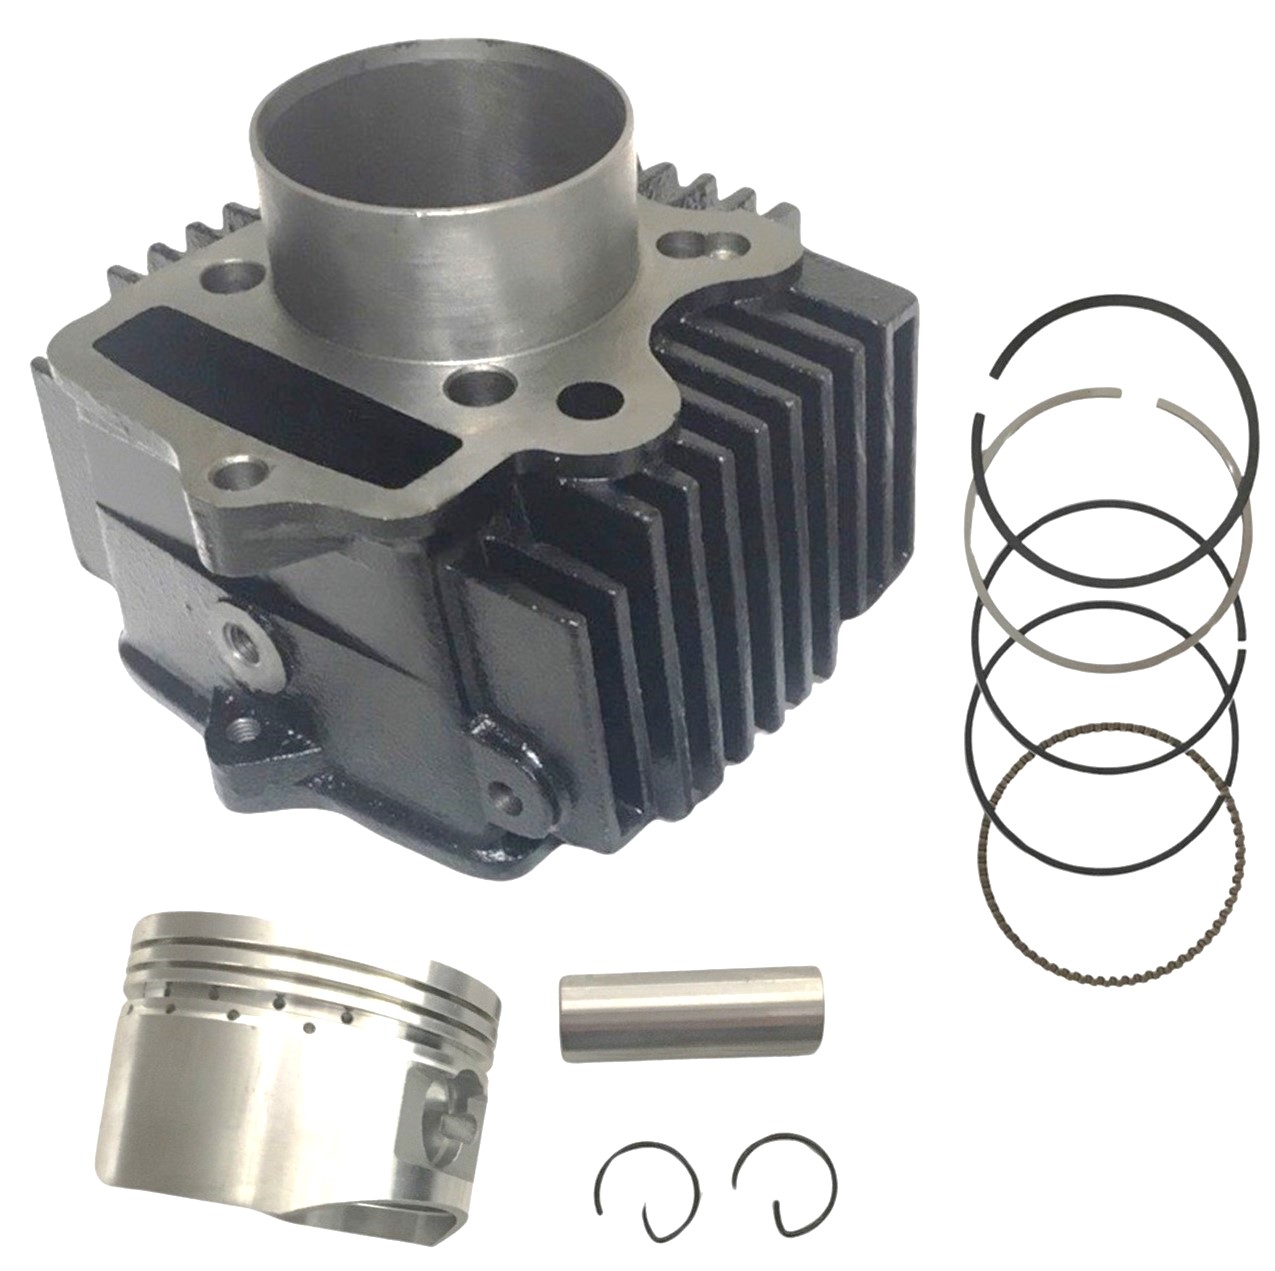 Cylinder Piston Top End Kit 70cc 4 Stroke Chinese ATVs, Dirtbikes B=47mm, H=62mm - Click Image to Close